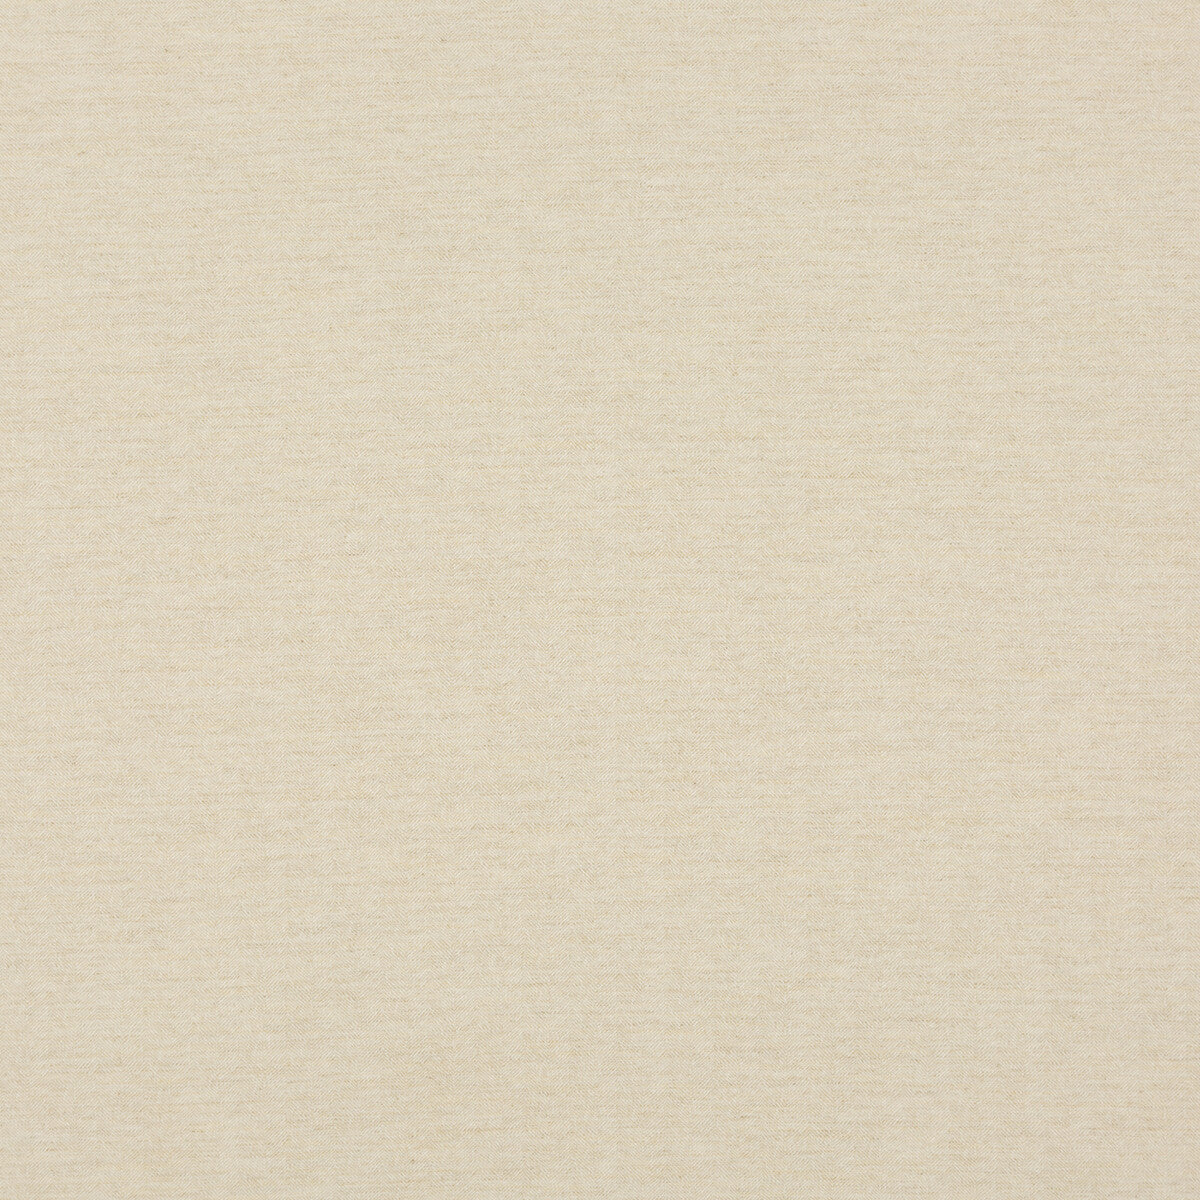 Canyon fabric in ivory color - pattern BF10680.104.0 - by G P &amp; J Baker in the Essential Colours collection